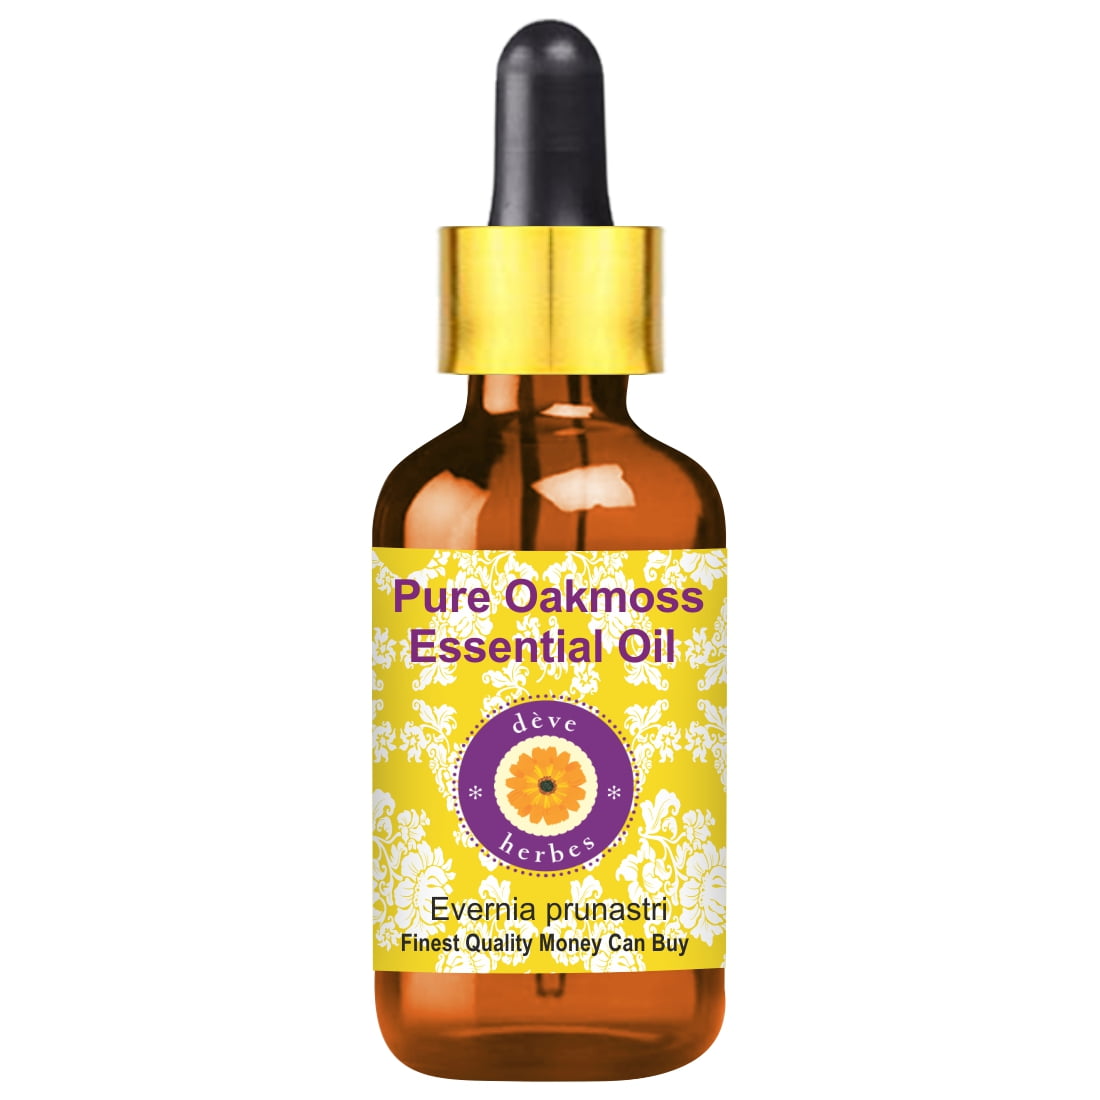 Deve Herbes Pure Oakmoss Essential Oil (Evernia prunastri) with Glass  Dropper 100% Natural Therapeutic Grade Steam Distilled for Personal Care  5ml